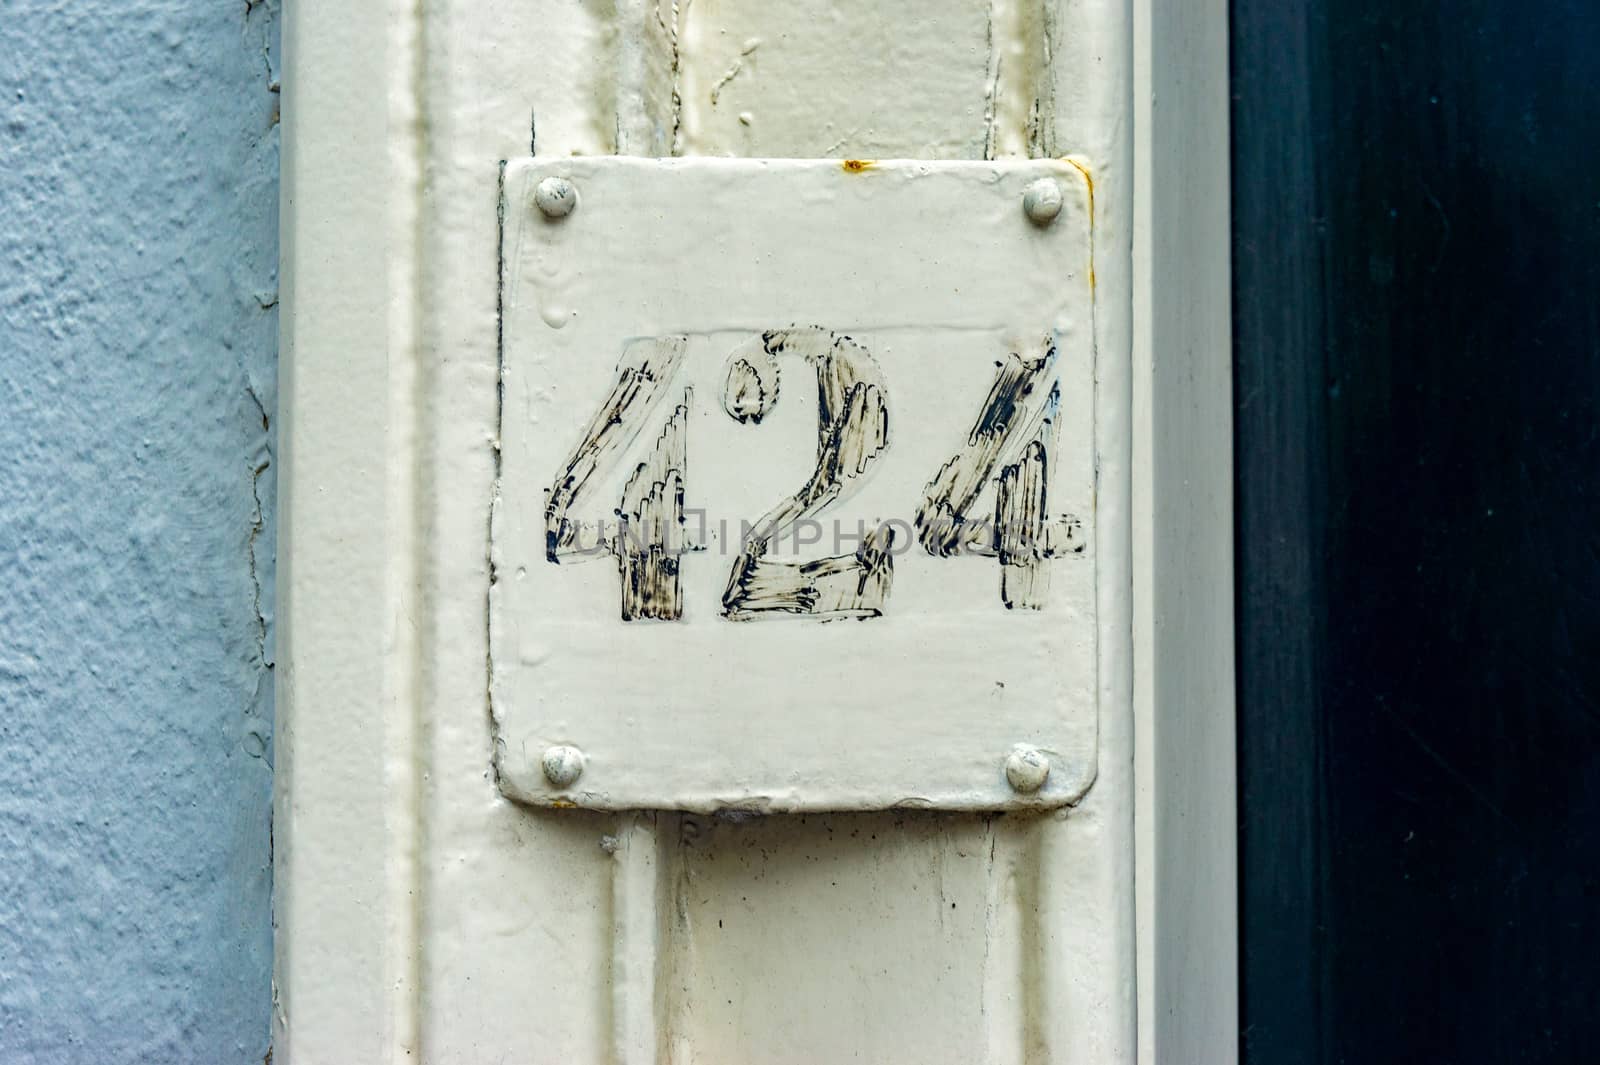 House number four hundred and twenty four (424)